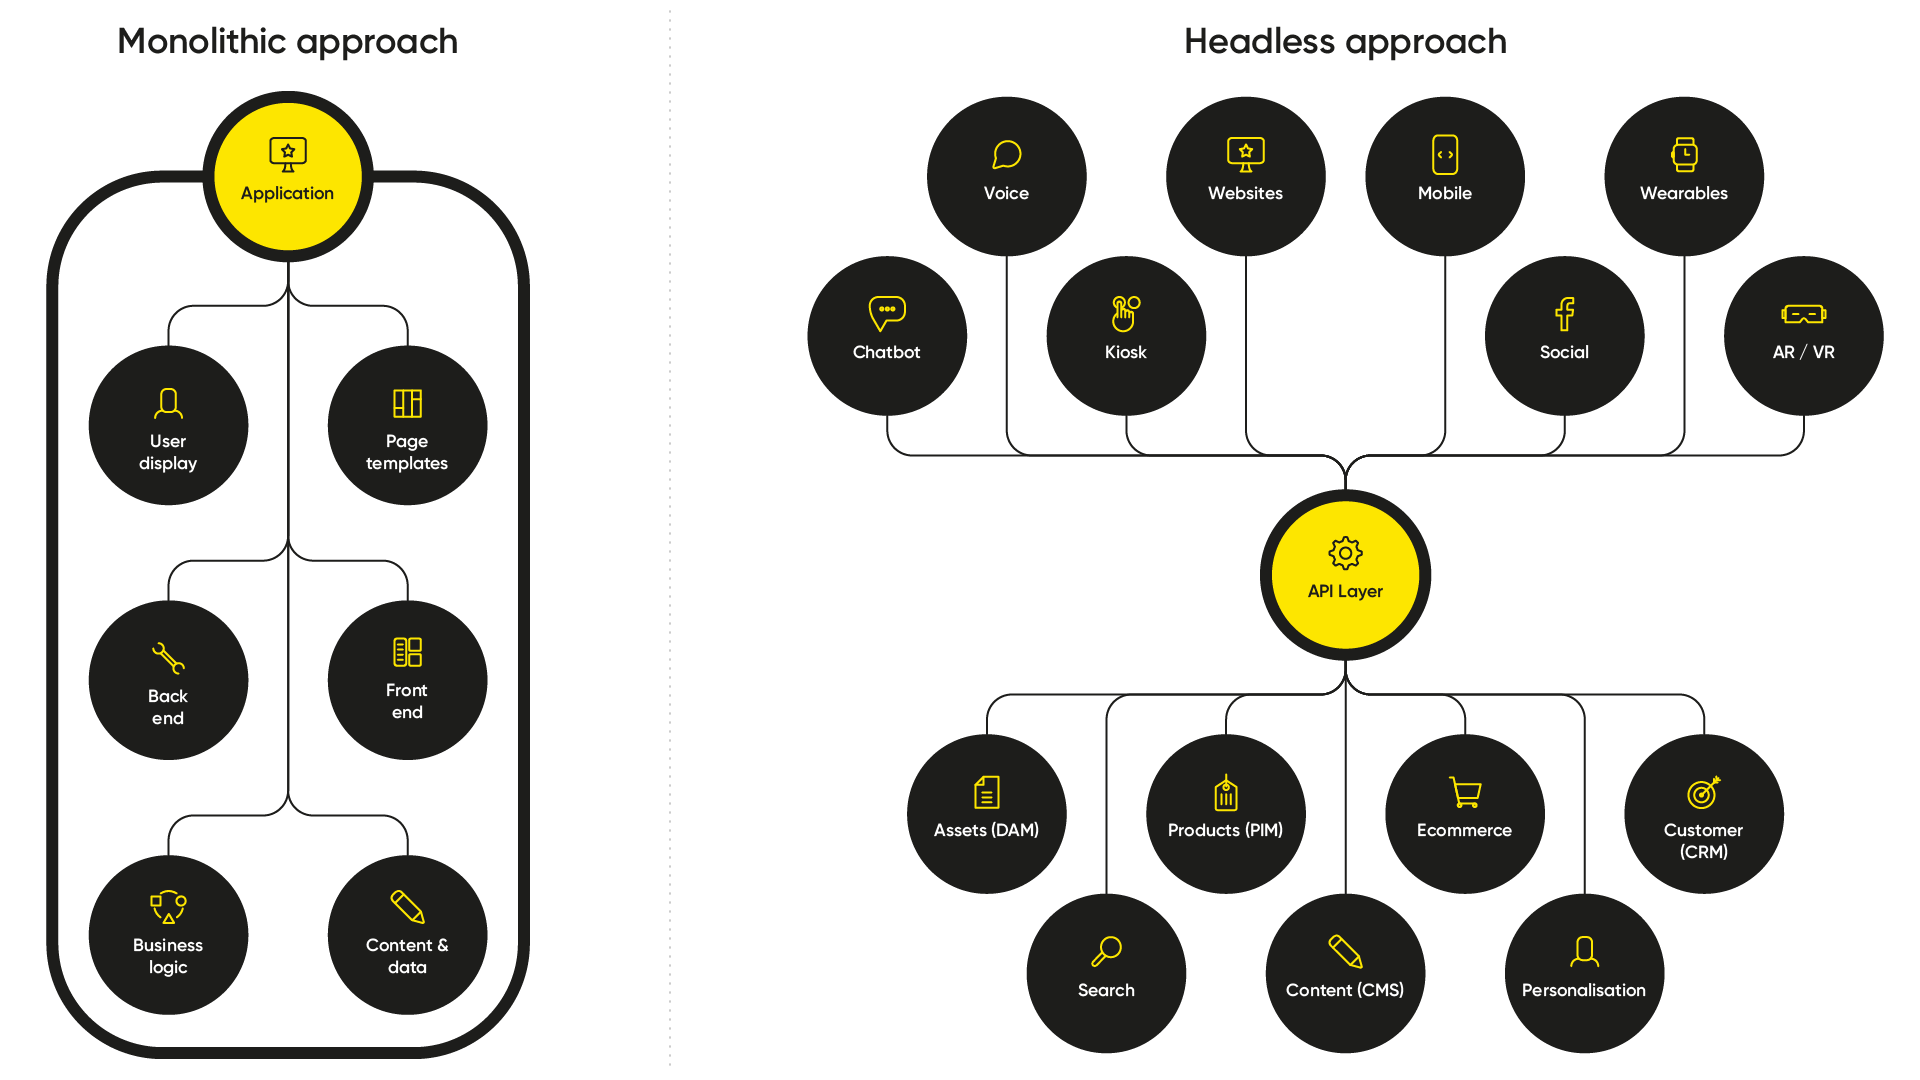 Diagram comparing monolithic and headless CMS architectures. Monolithic architecture shows the front and back ends as part of a single application. Headless shows the different back-end features present in an API layer which then allows them to be presented in as many front-ends as needed